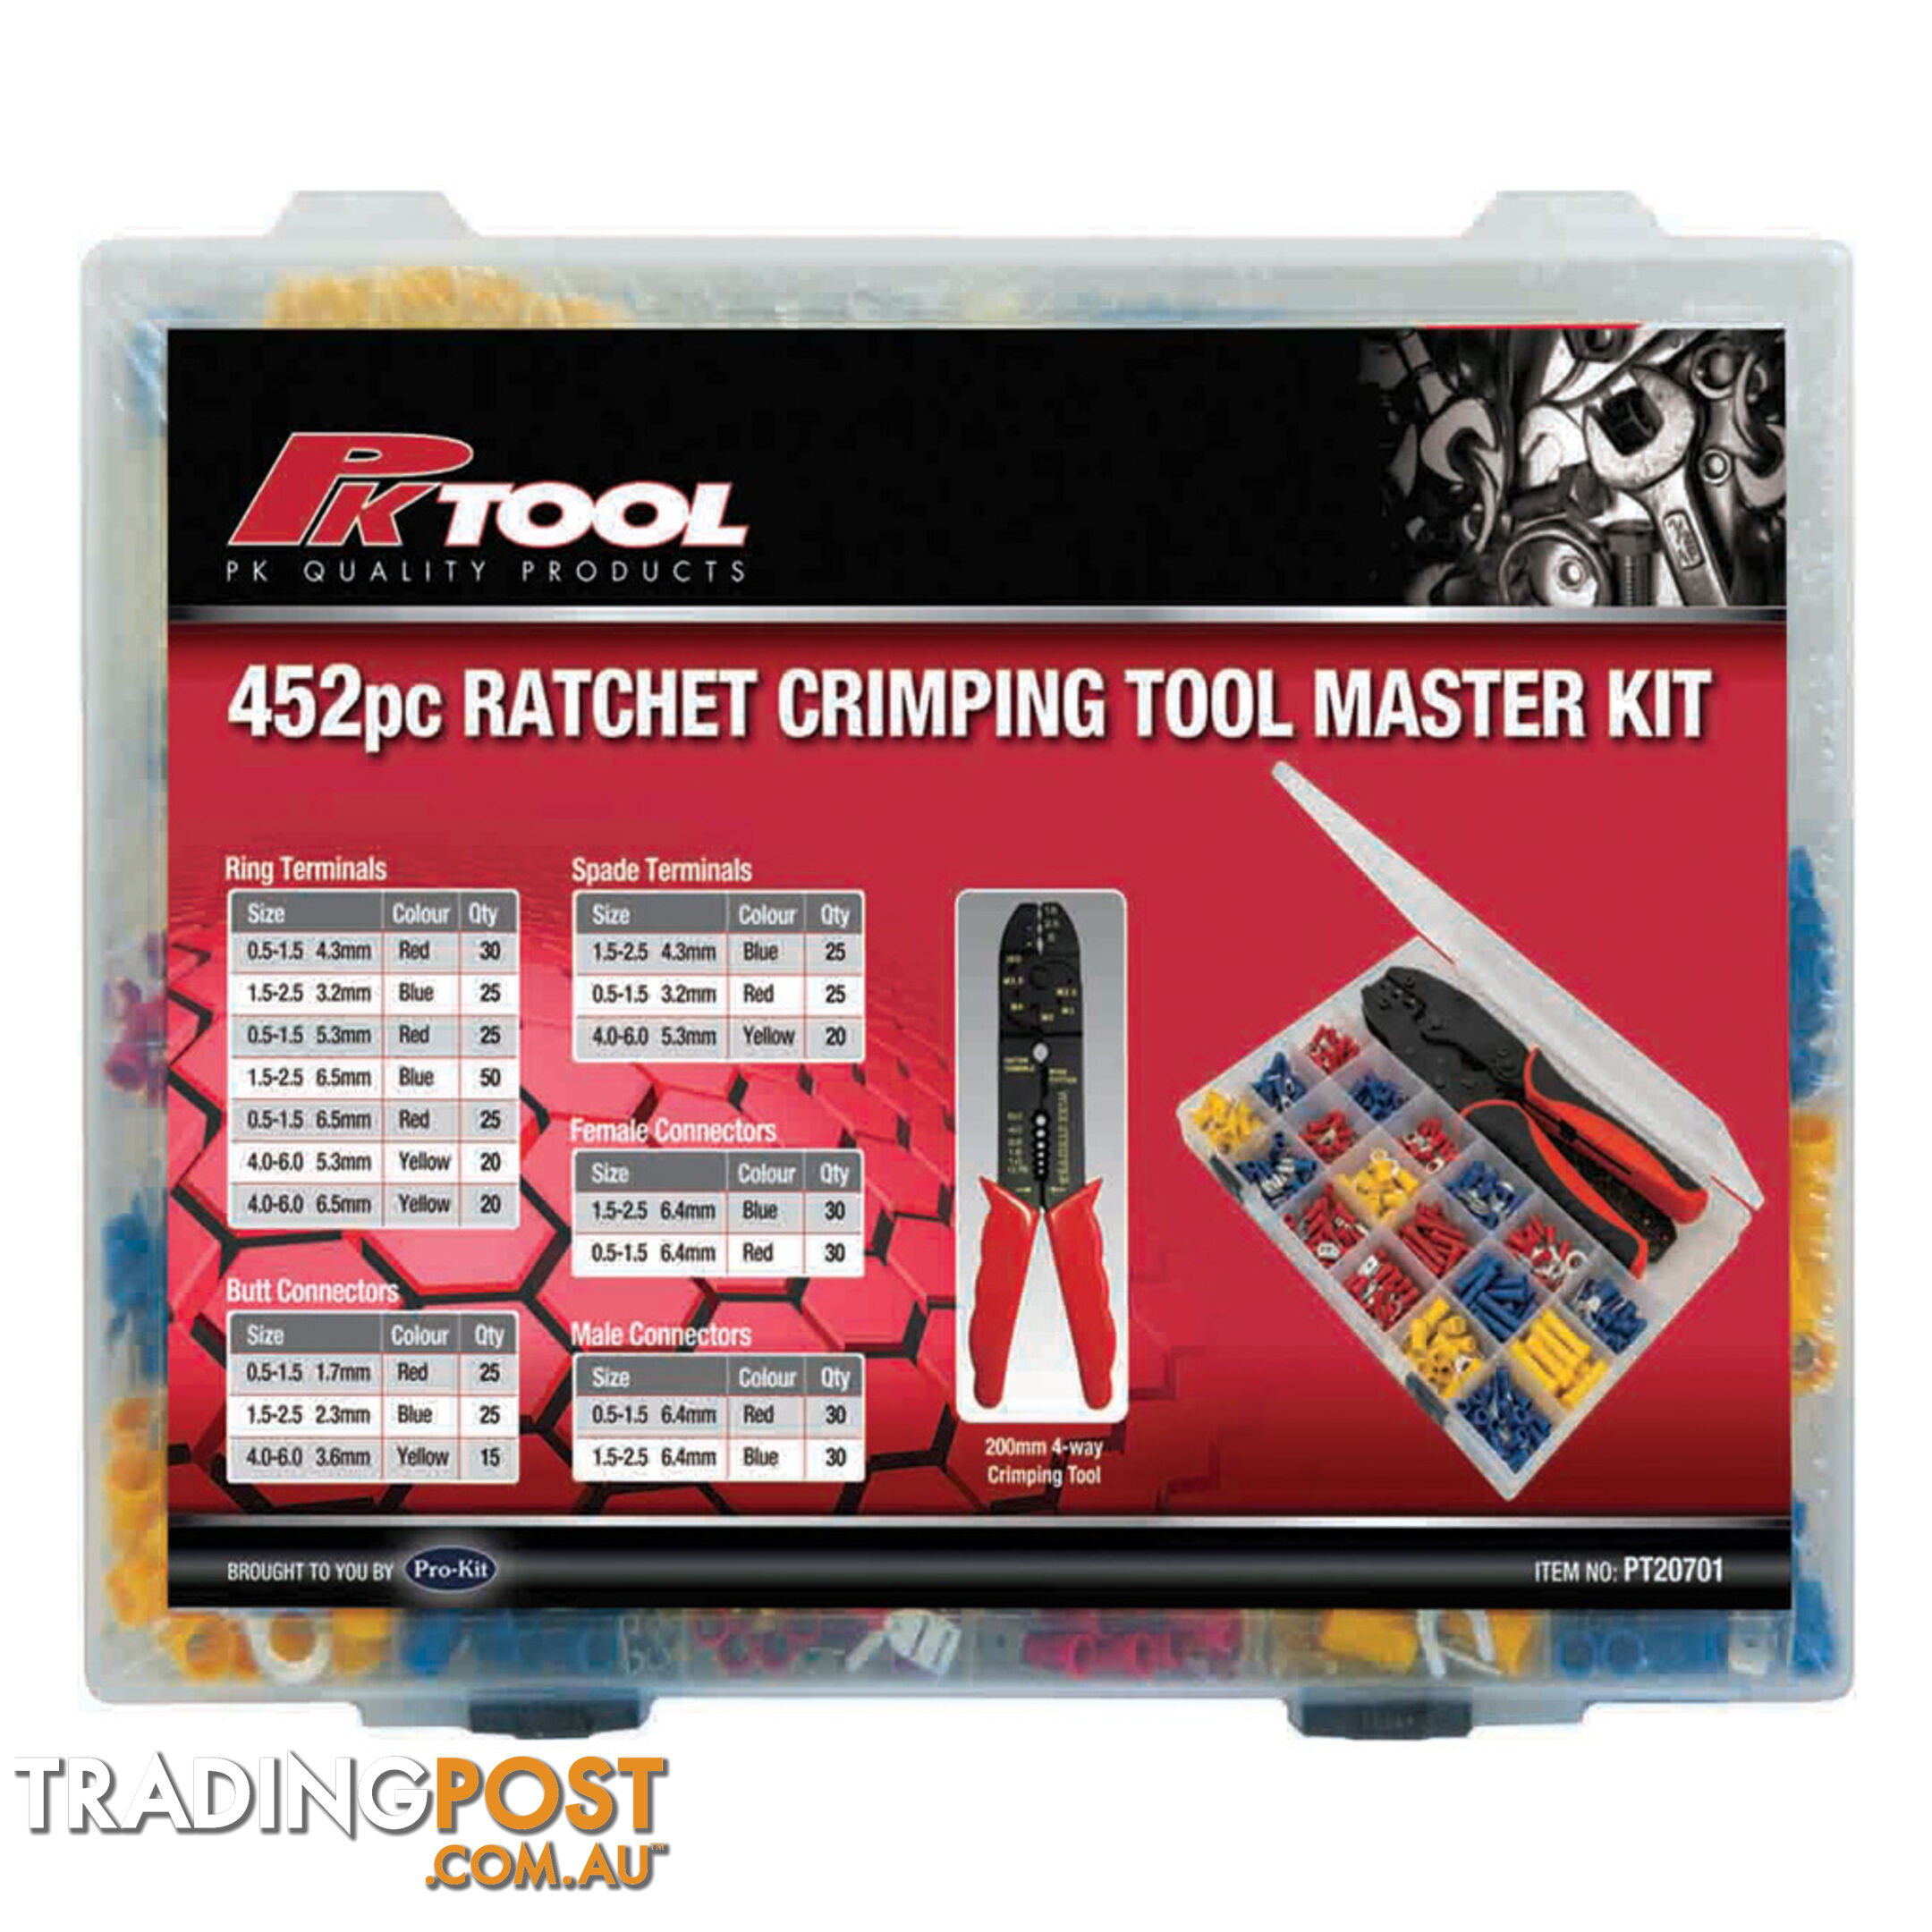 Mixed Crimp Terminal Kit  with Ratchet Crimping Plier and Wire Stripper 450pc SKU - PT20701